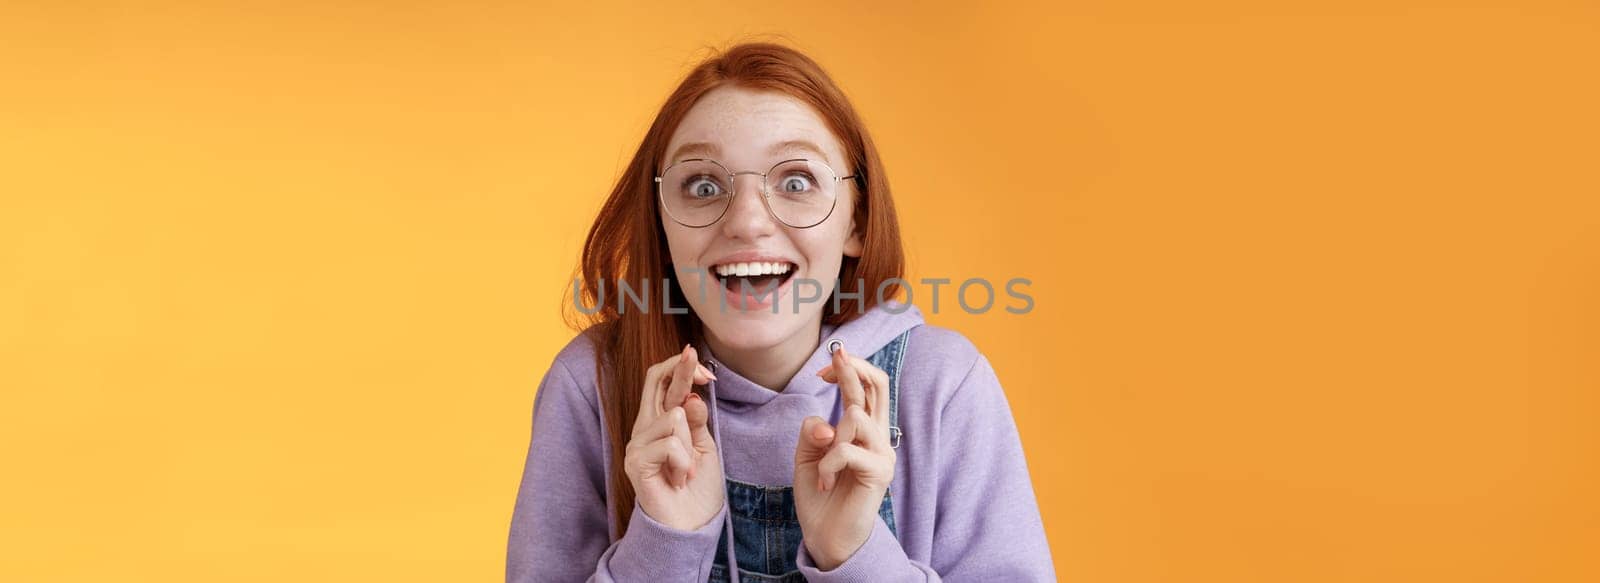 Lifestyle. Surprised girl dream came true celebrating standing amused excited cross fingers good luck wish fulfilled smiling emotive thrilled finally win receive good news optimistic hopeful orange background.